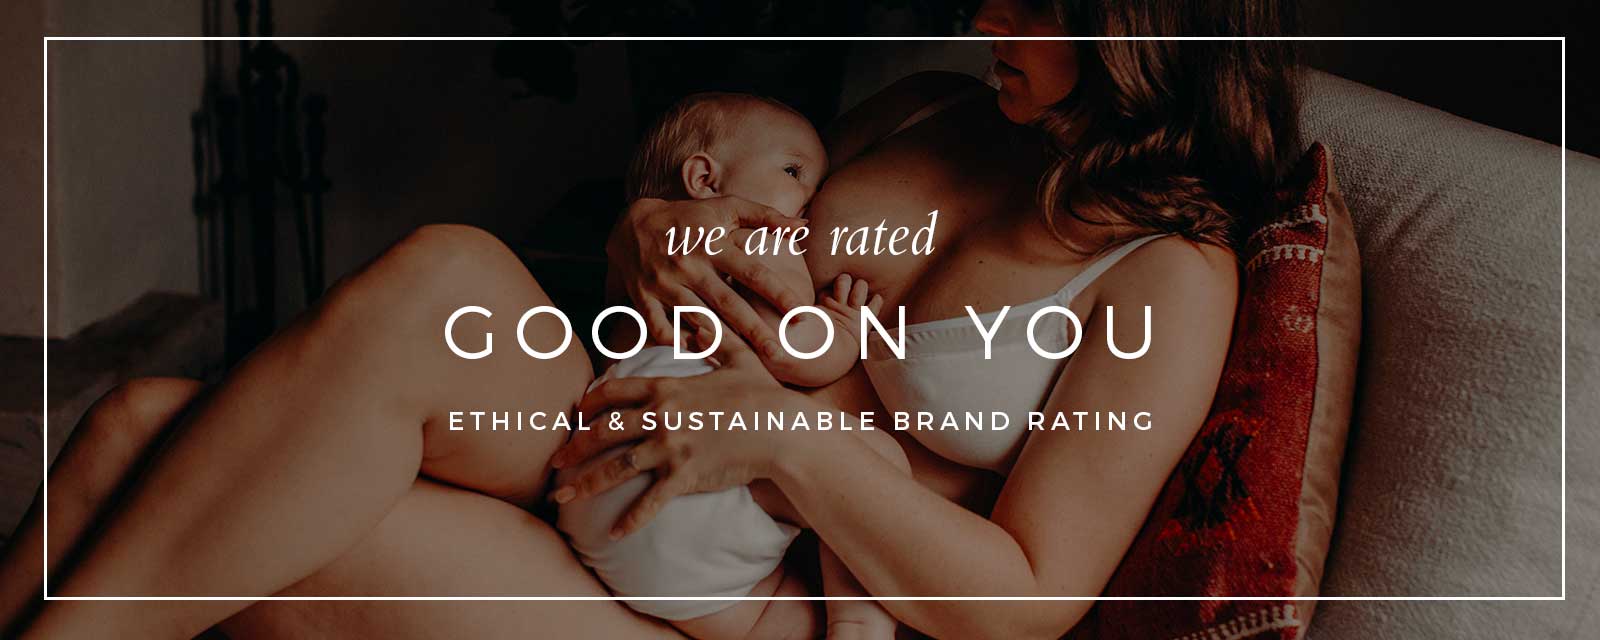 Nette Rose - Sustainability Rating - Good On You